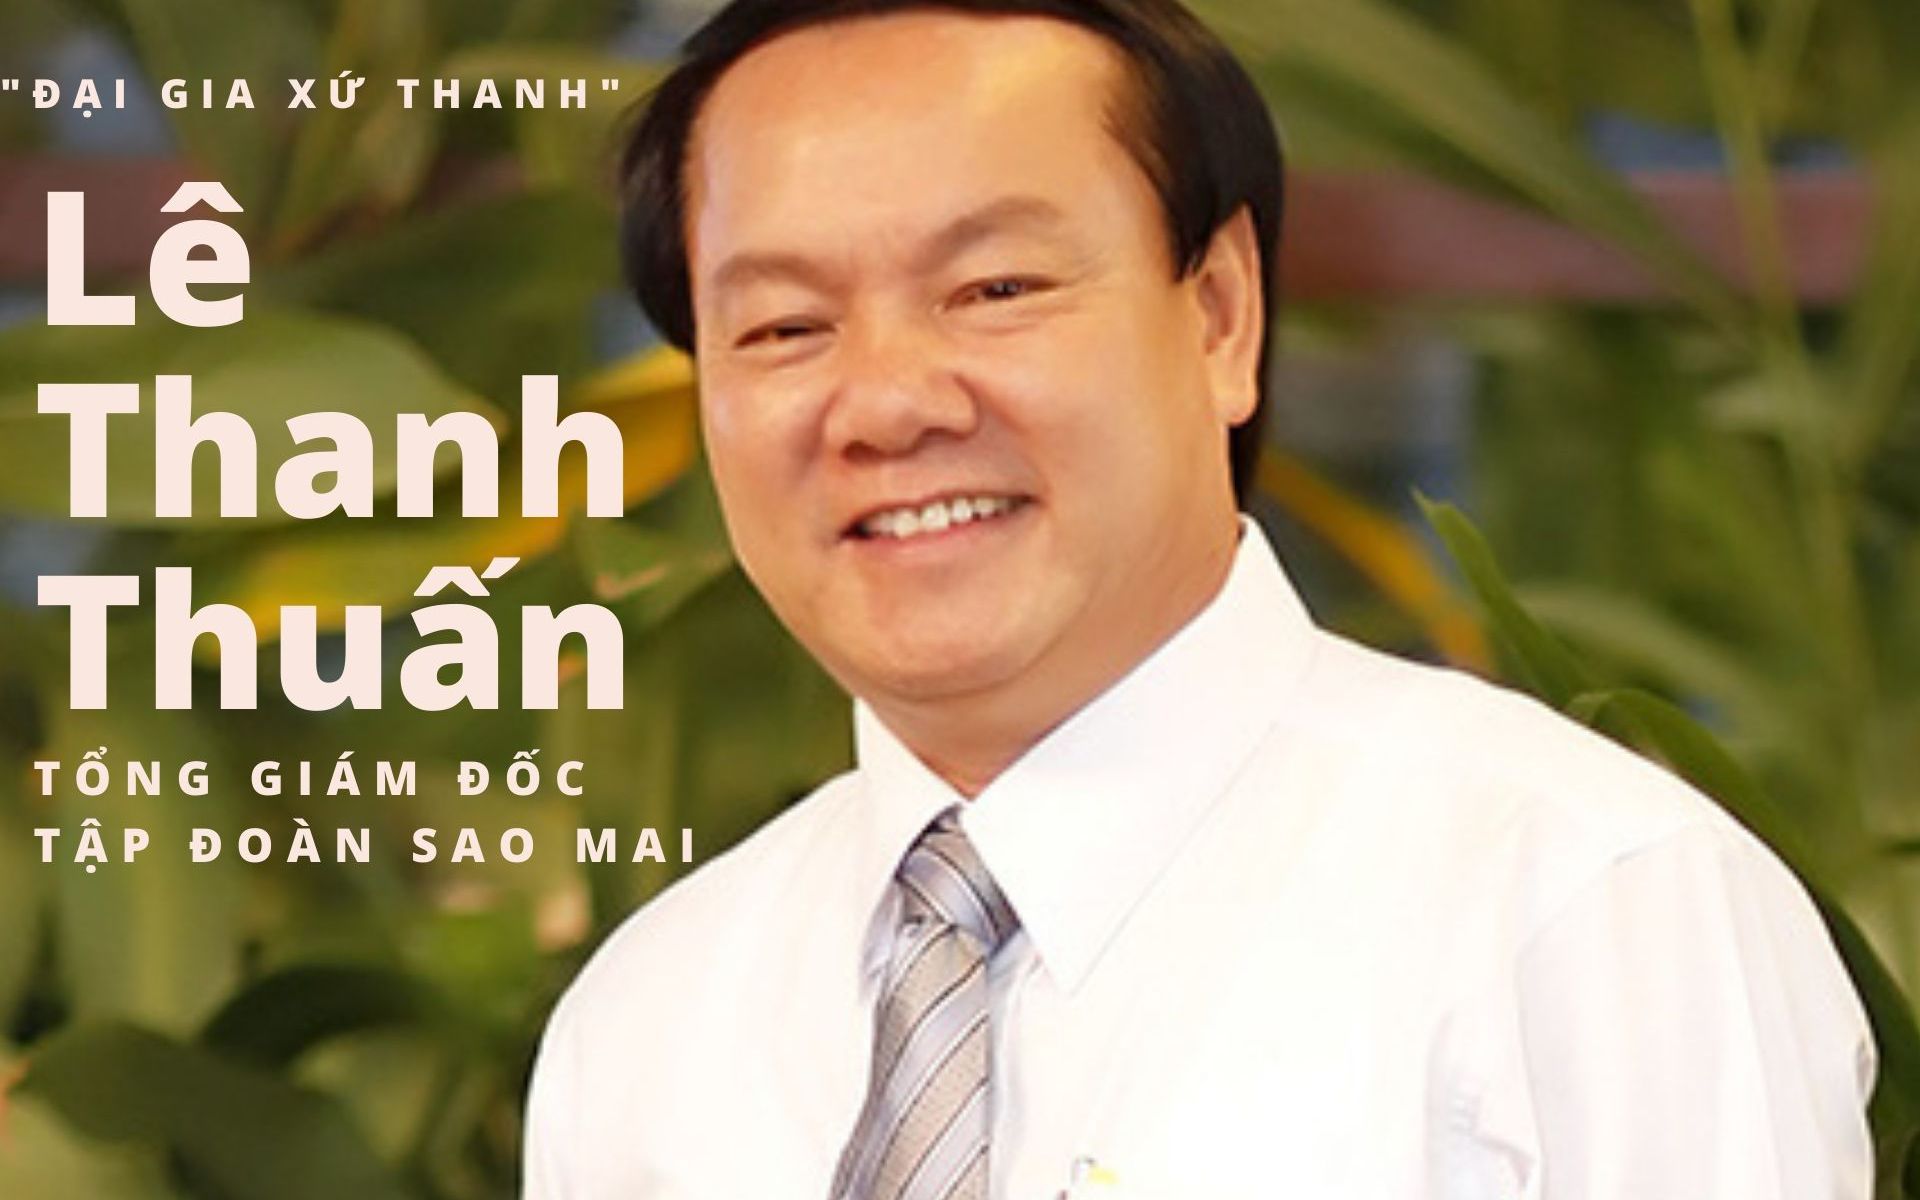 Revealing the huge fortune of Chairman of Sao Mai Group (ASM) Le Thanh Thuan